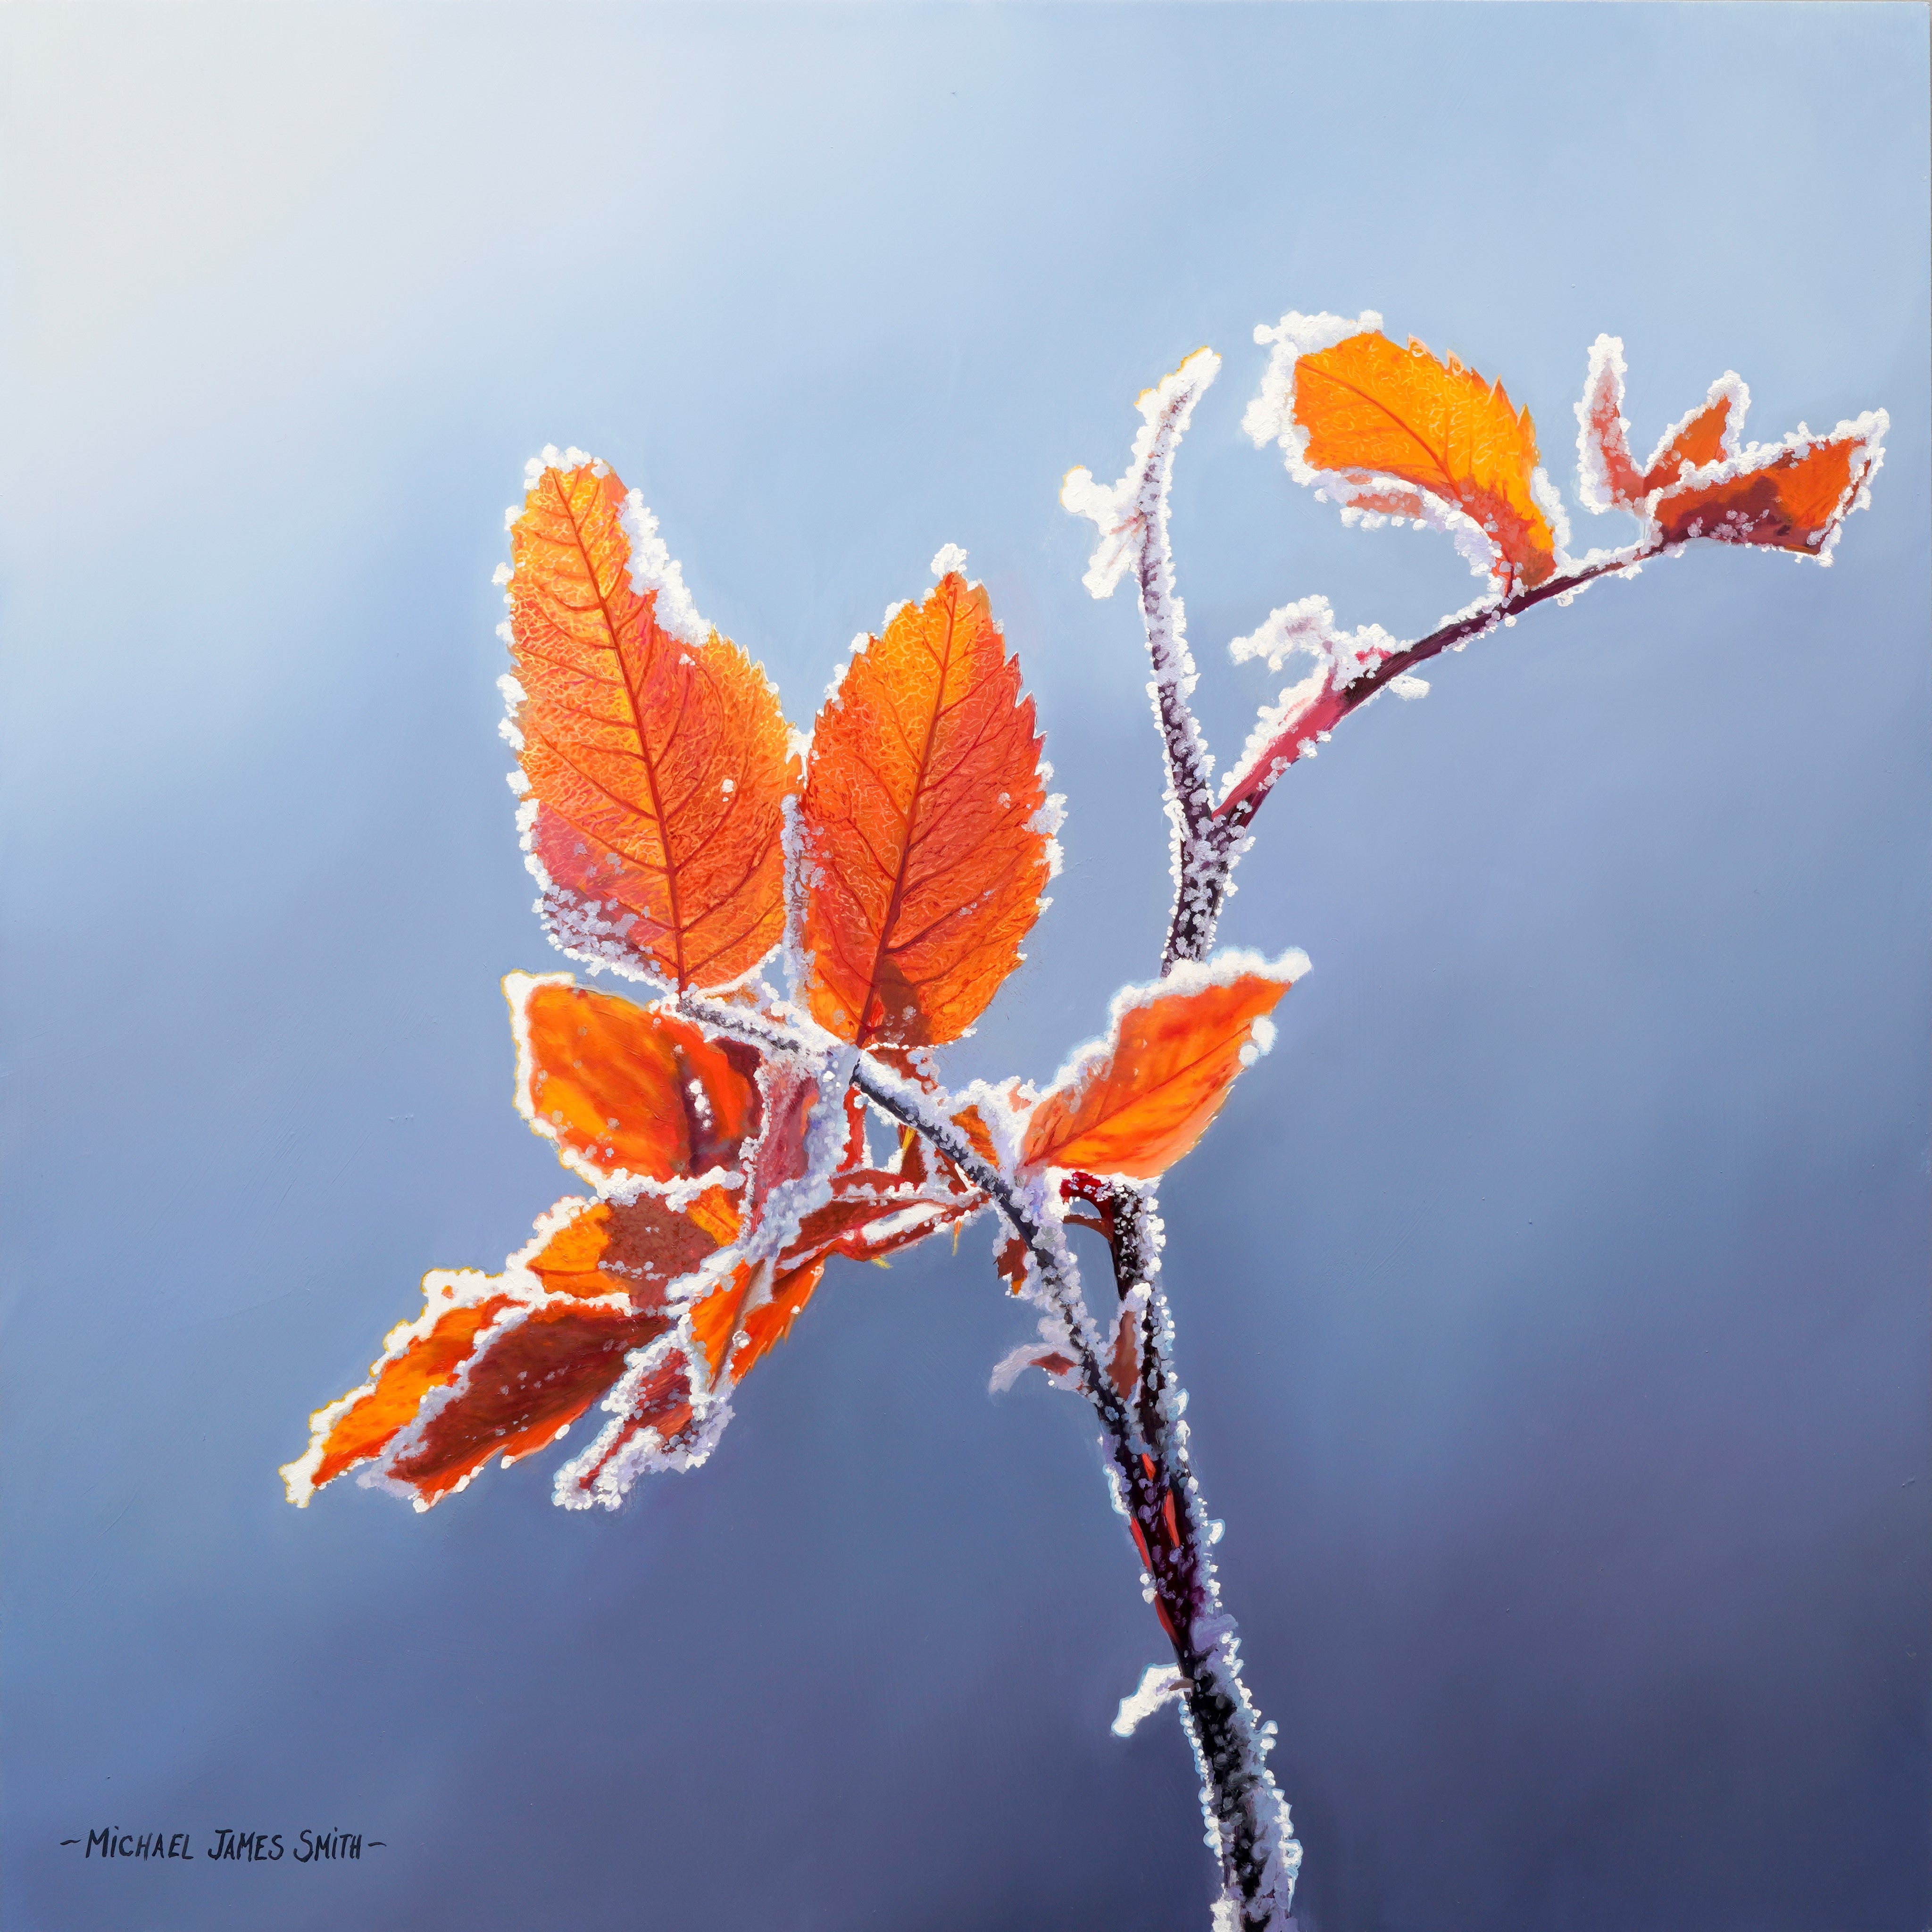 New Lesson ' Frosty Leaves' Now Available on MJS TV